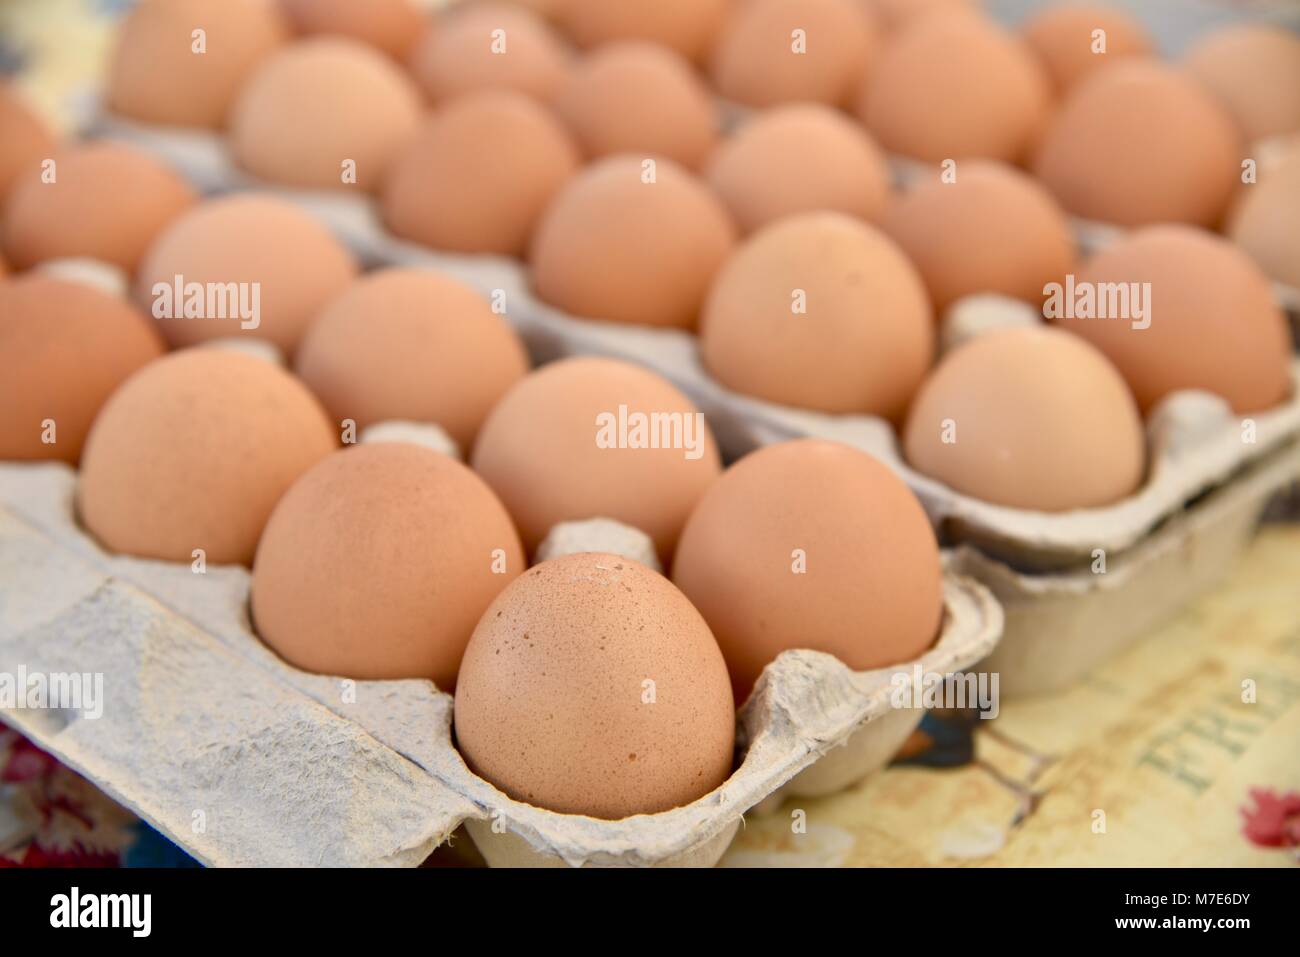 Several egg cartons of farm-fresh brown eggs on display at farmers market in San Diego, California, USA Stock Photo